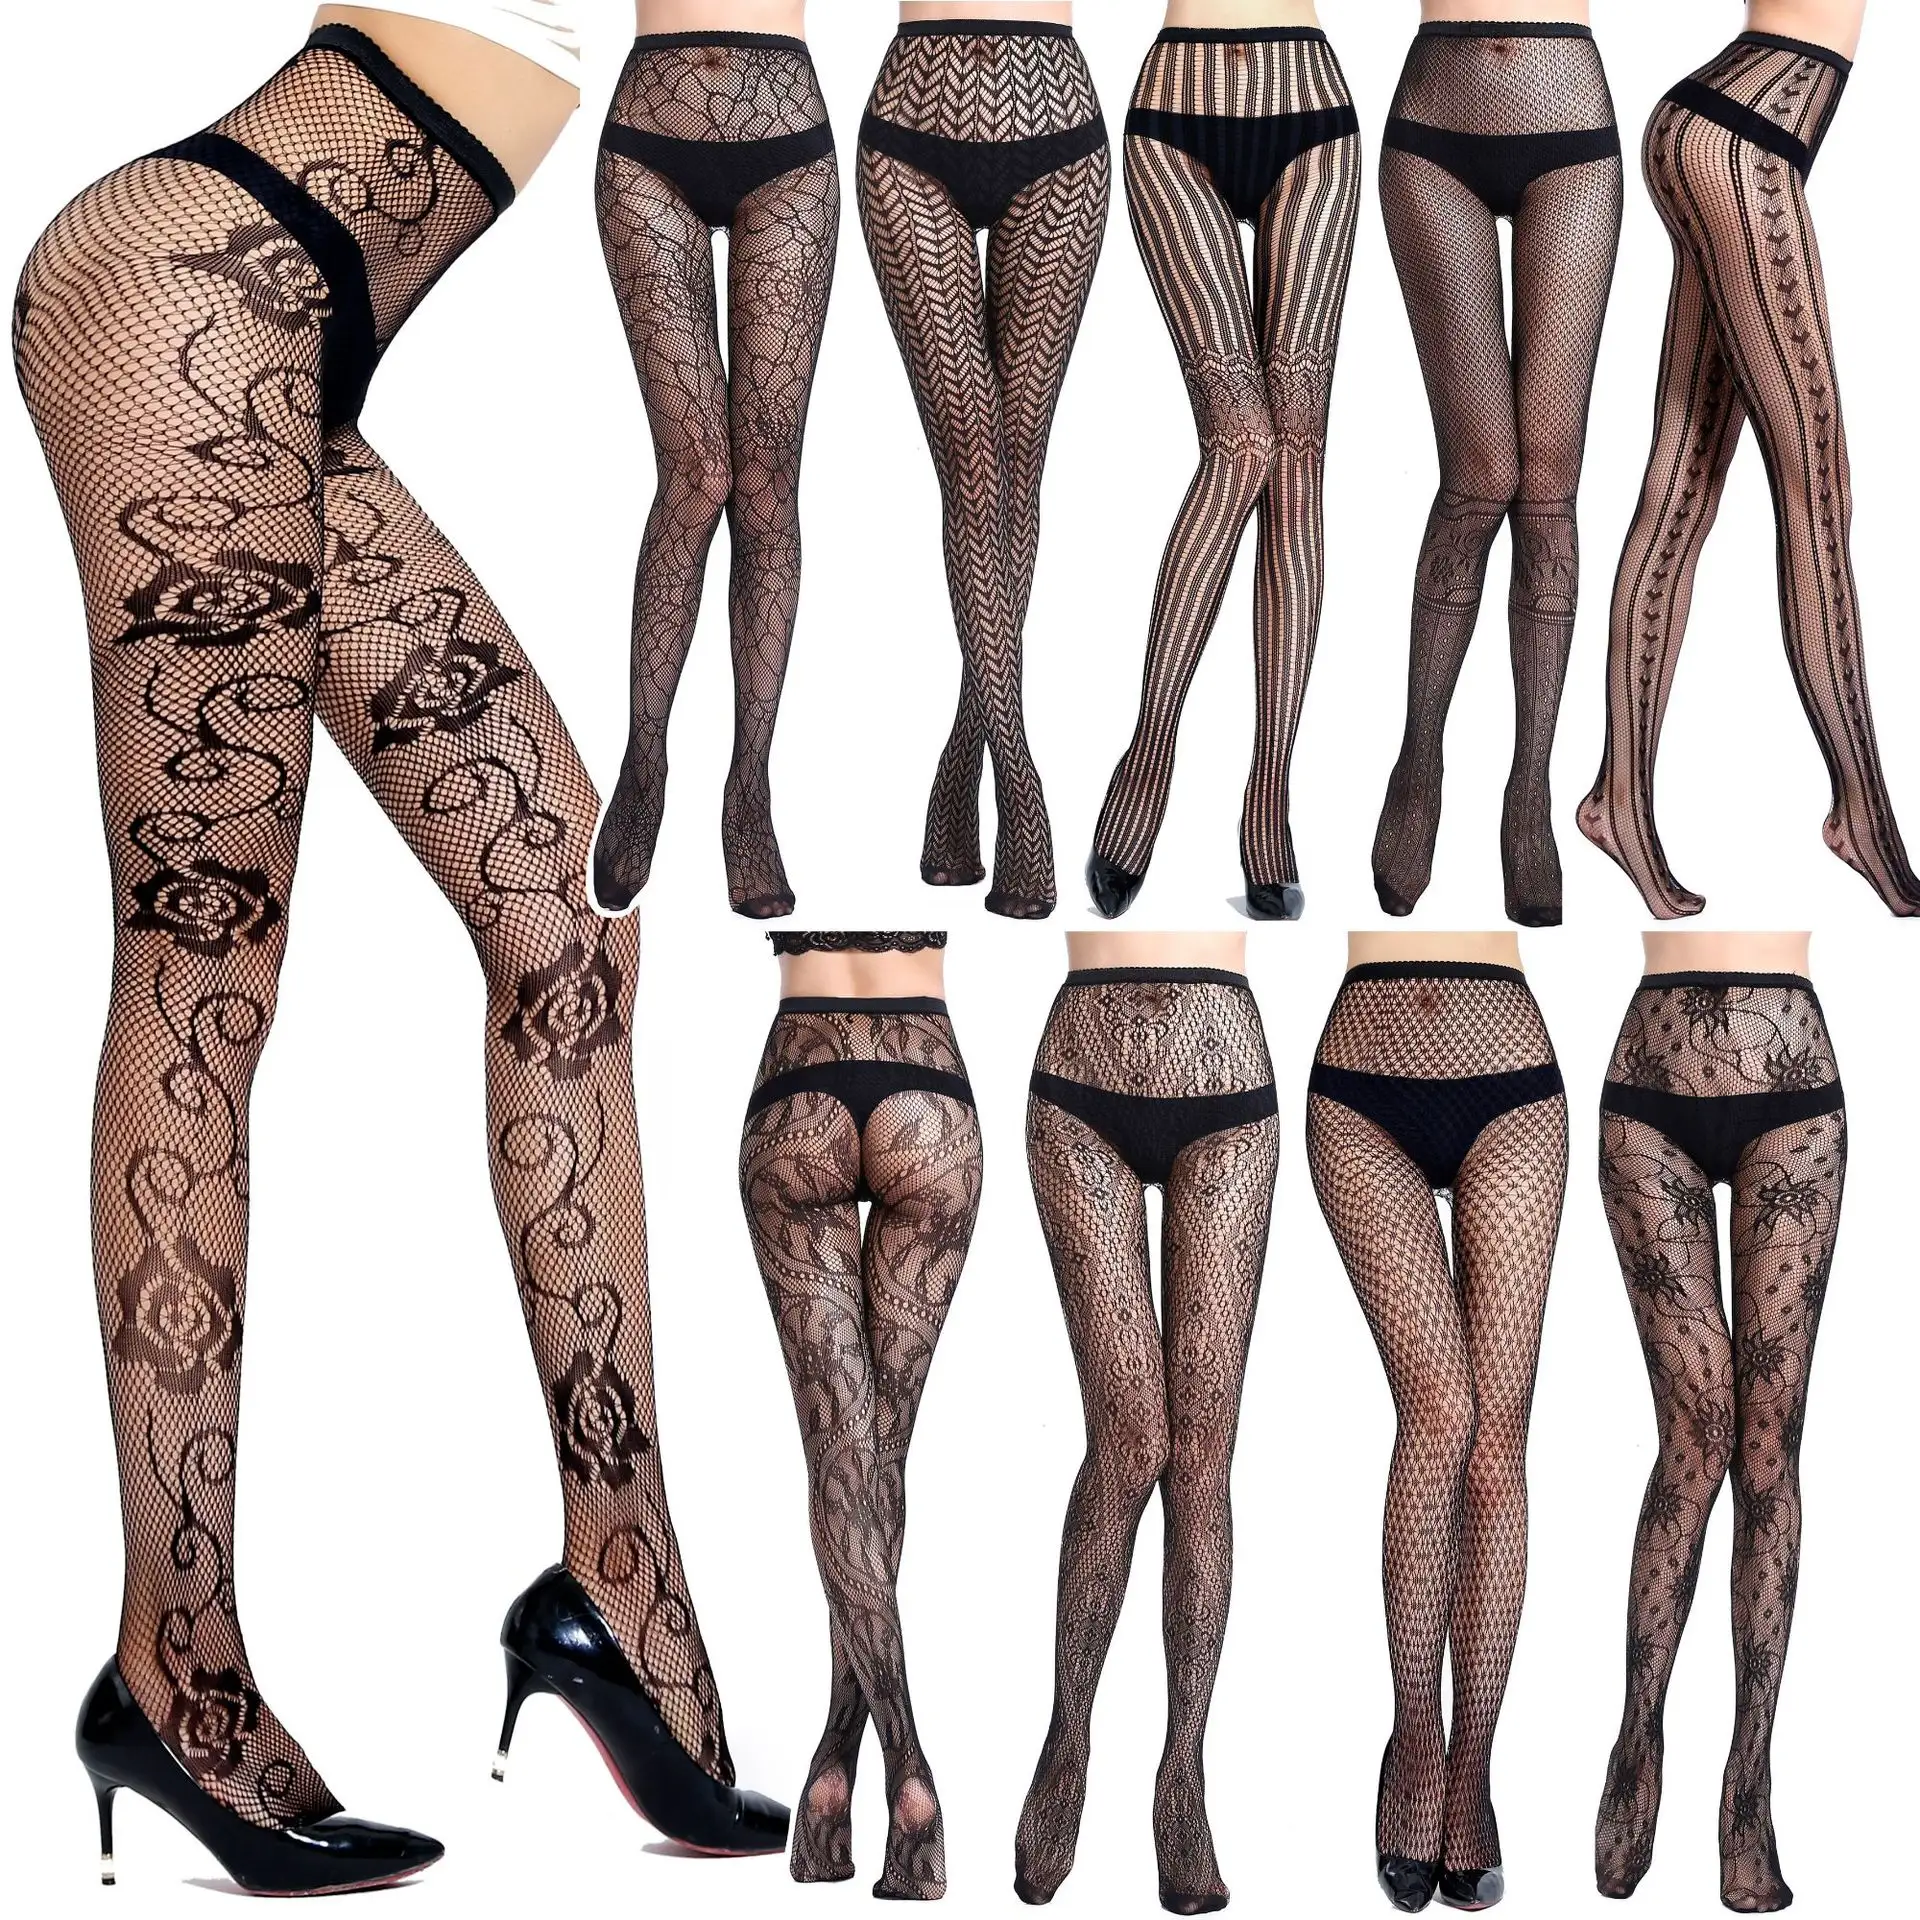 2023 Factory Direct Supply Gg Fishnet Stockings Womens Lace Mesh Patterned Fishnet Leggings Tights Garments Pantyhose